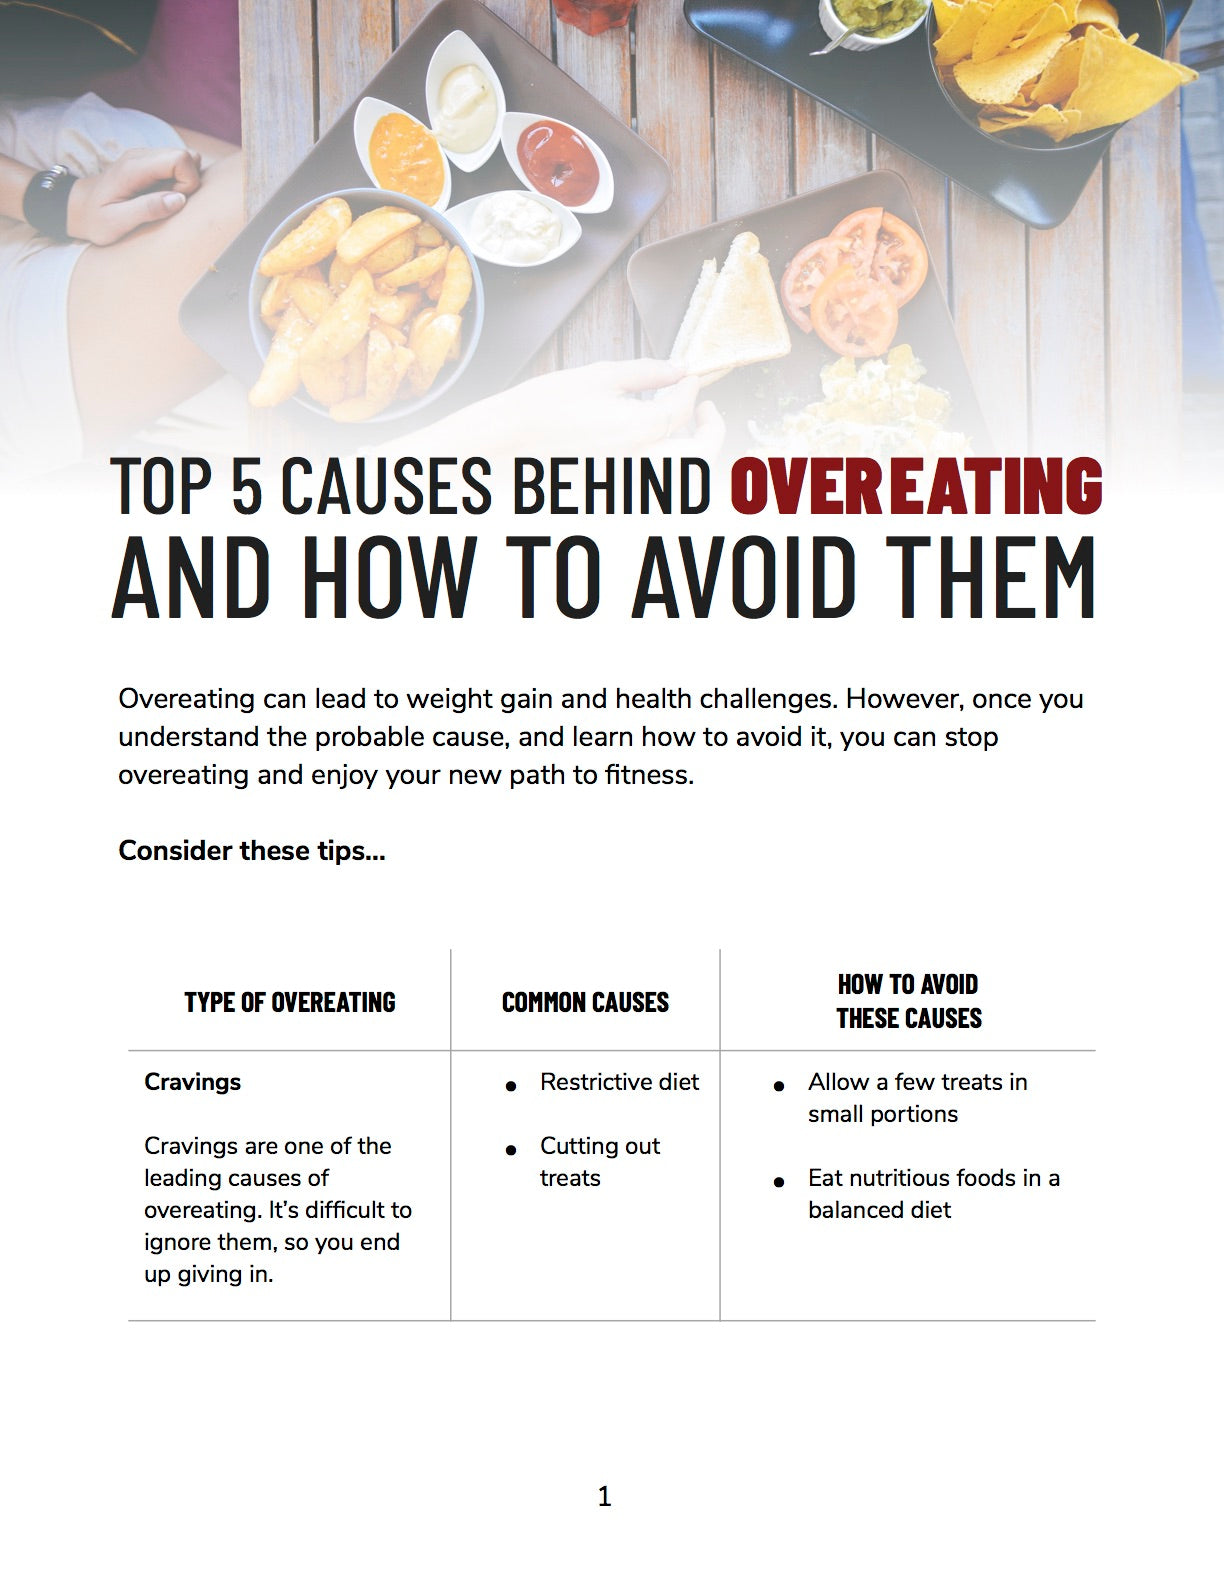 Top 5 Causes Behind Overeating and How To Avoid Them